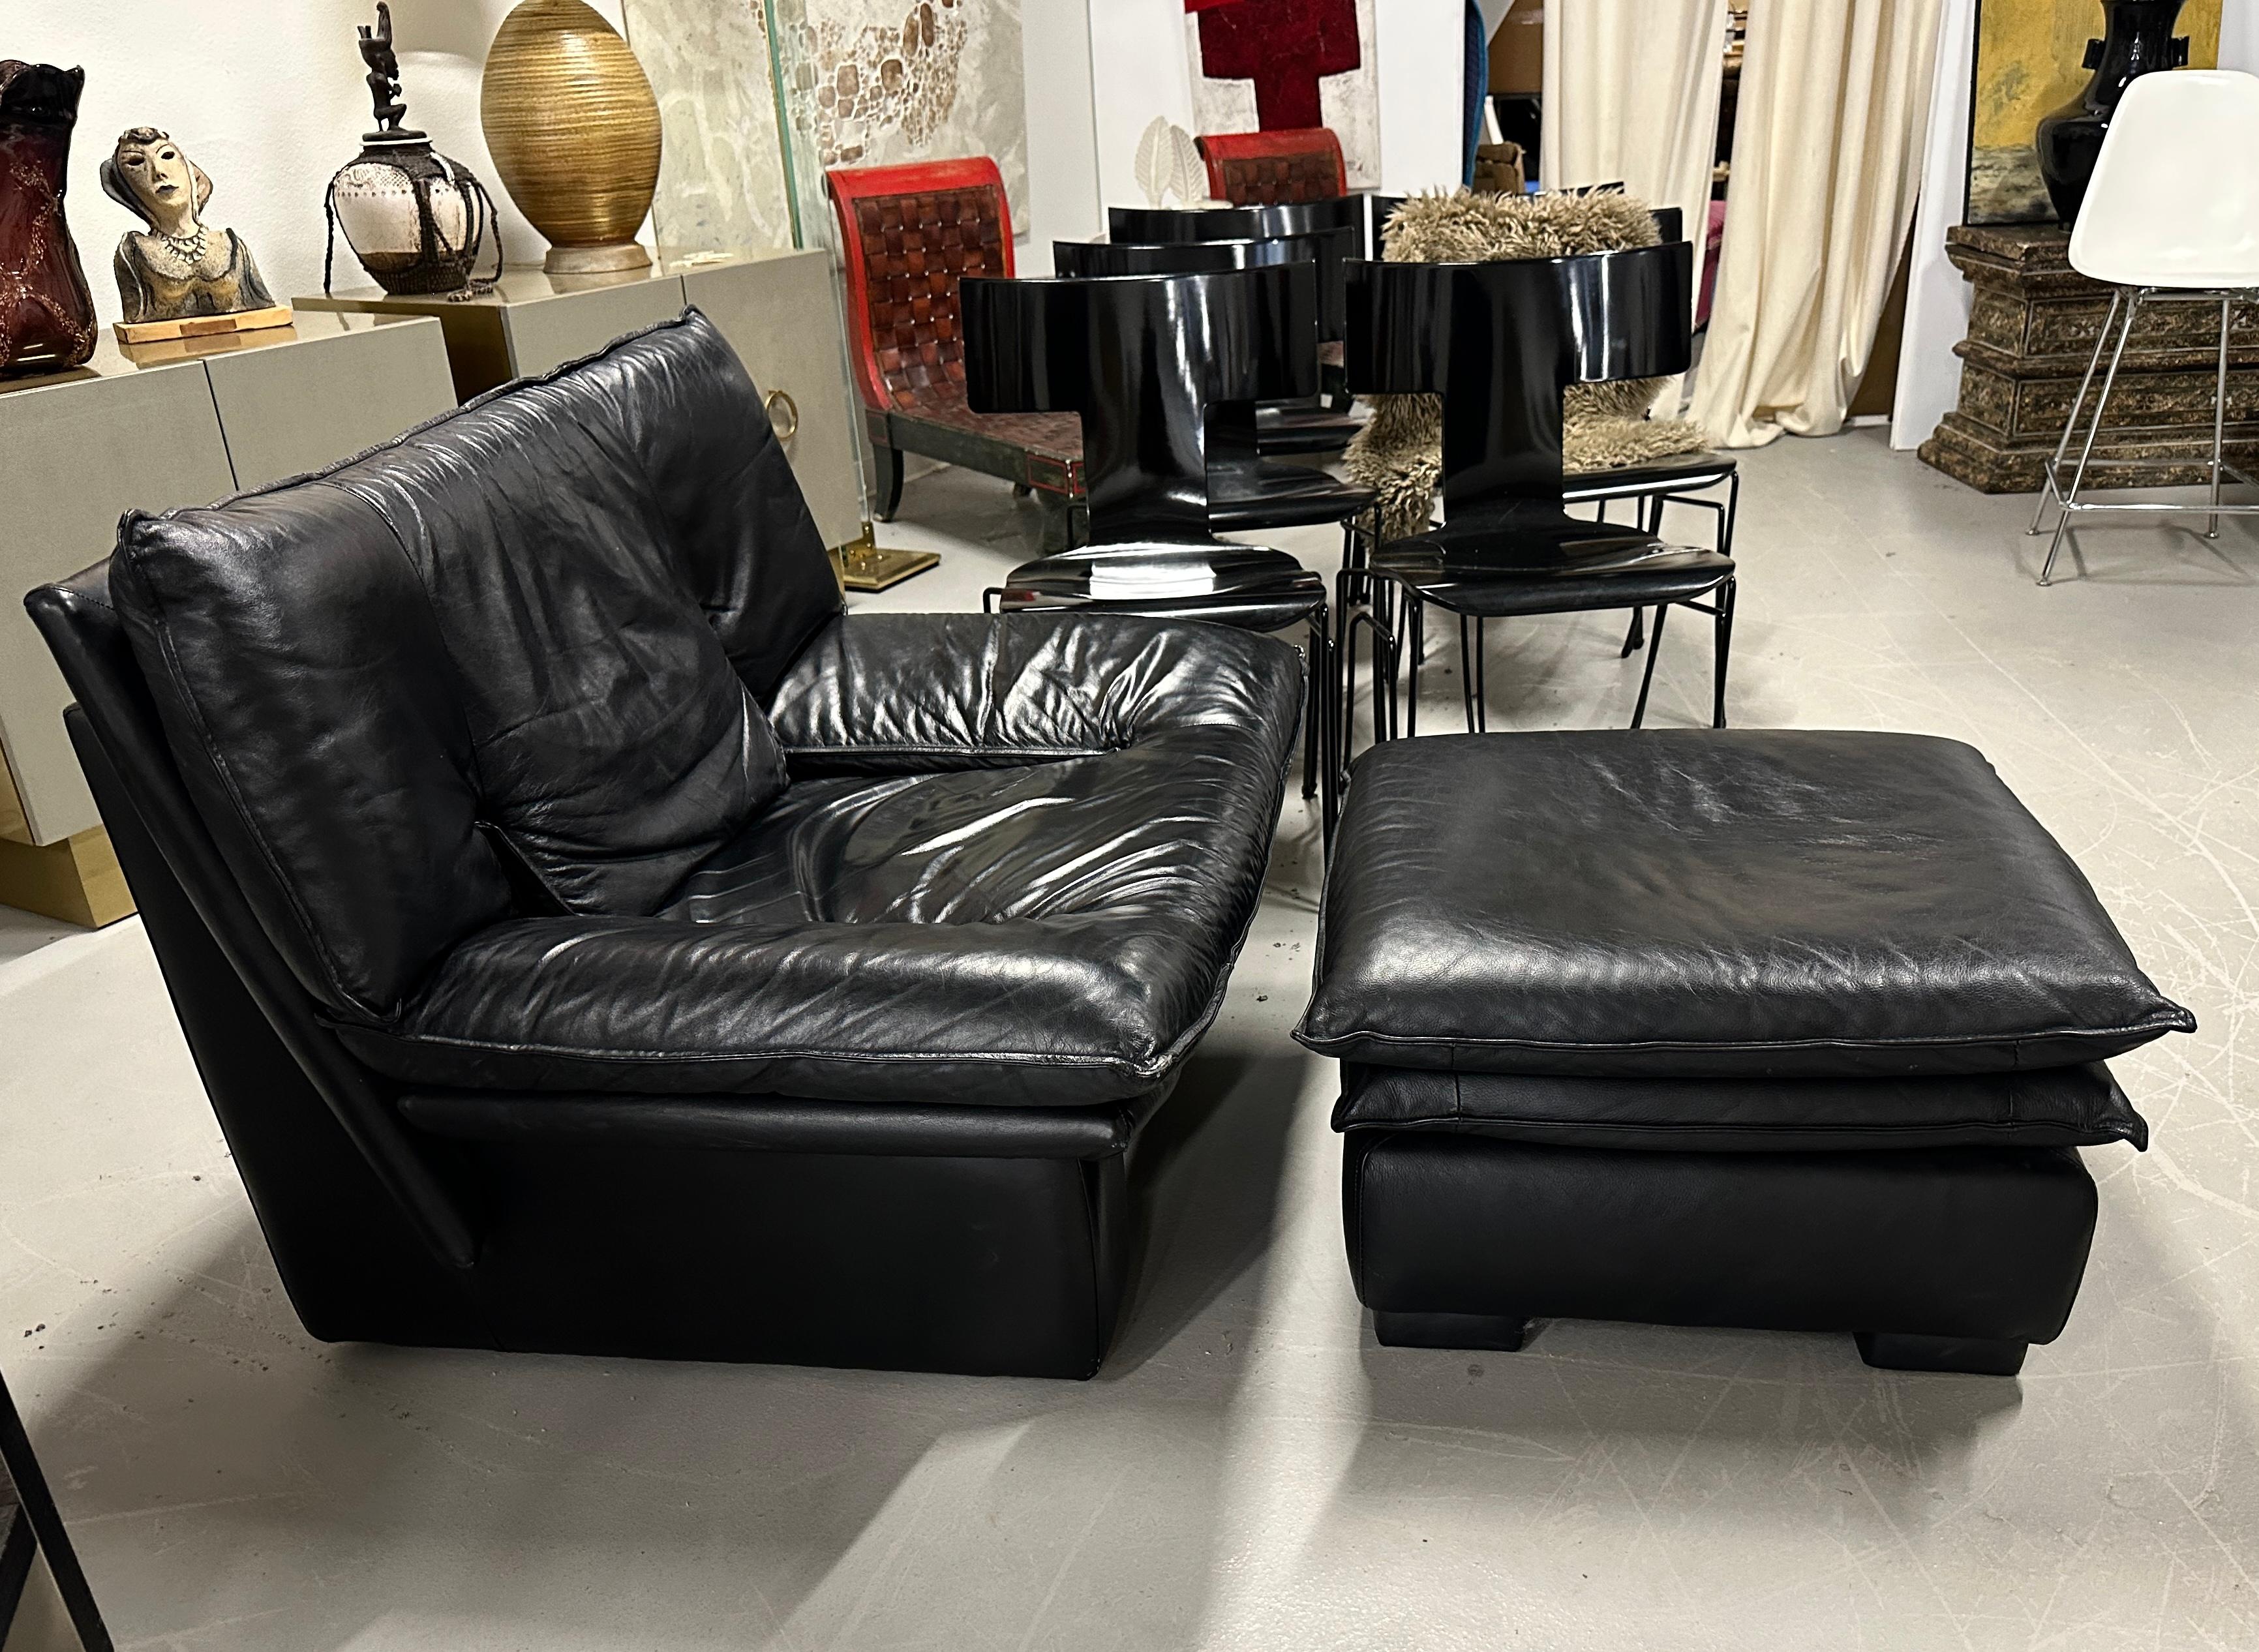 Sleek post modern lounge chair and ottoman by Nicoletti Salotti from the 1980s. Extremely comfortable. The black leather is soft and supple. The chair and ottoman are in good age appropriate condition with some minor wear and some minor rubbing to